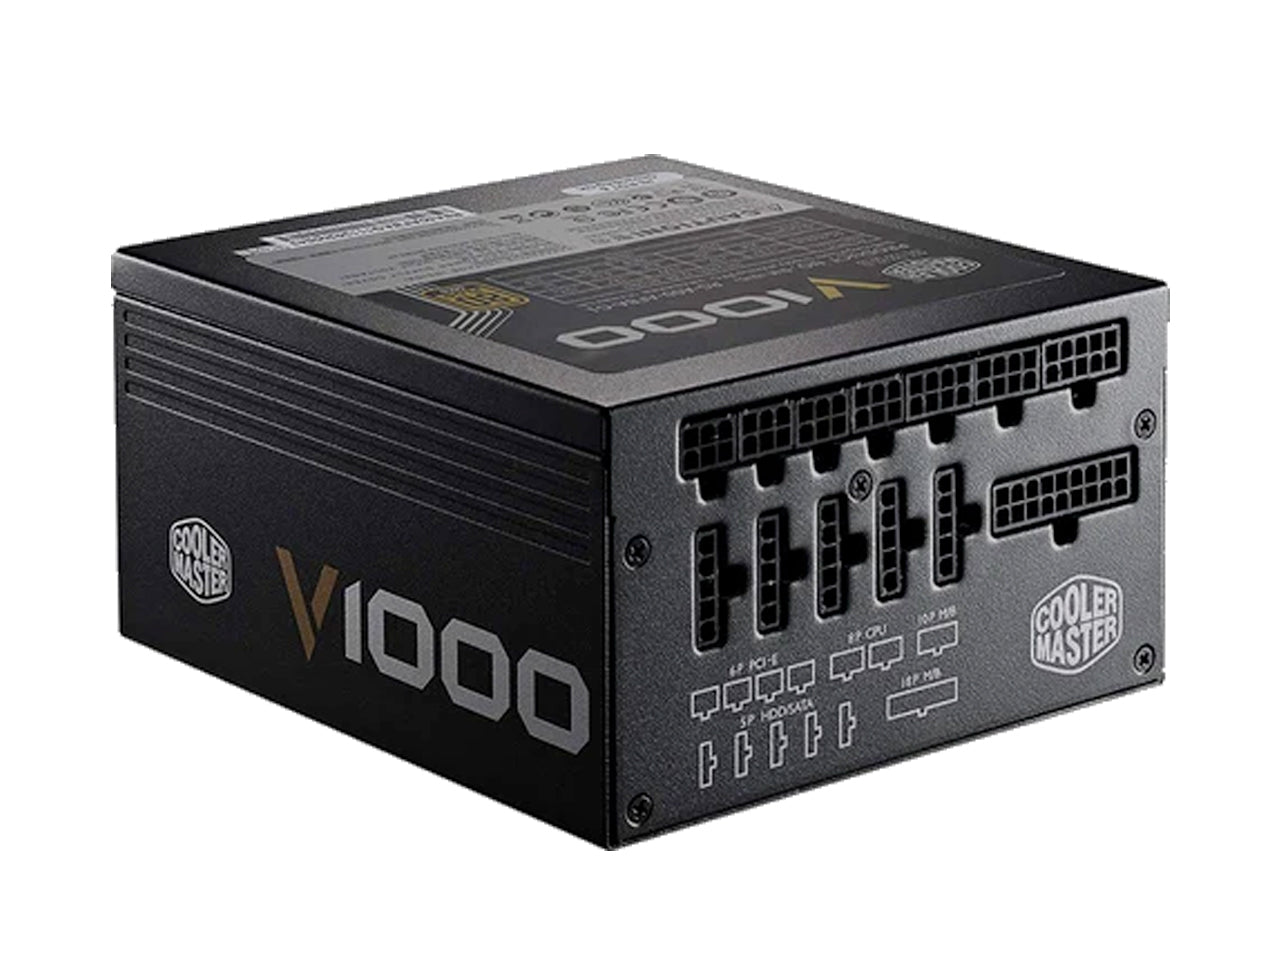 Cooler Master Vanguard v1000 1000W A/UK CABLE Power Supply